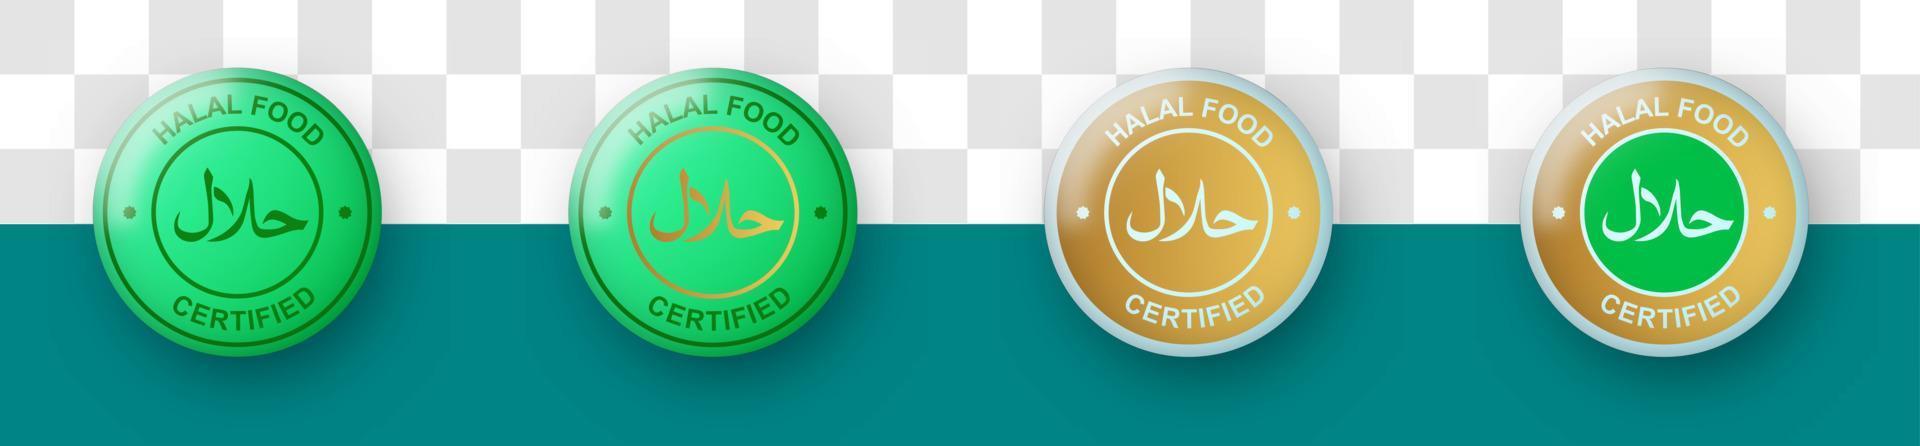 Halal food label collection with golden and green color style. Set of badges or labels for halal in 3d design. vector